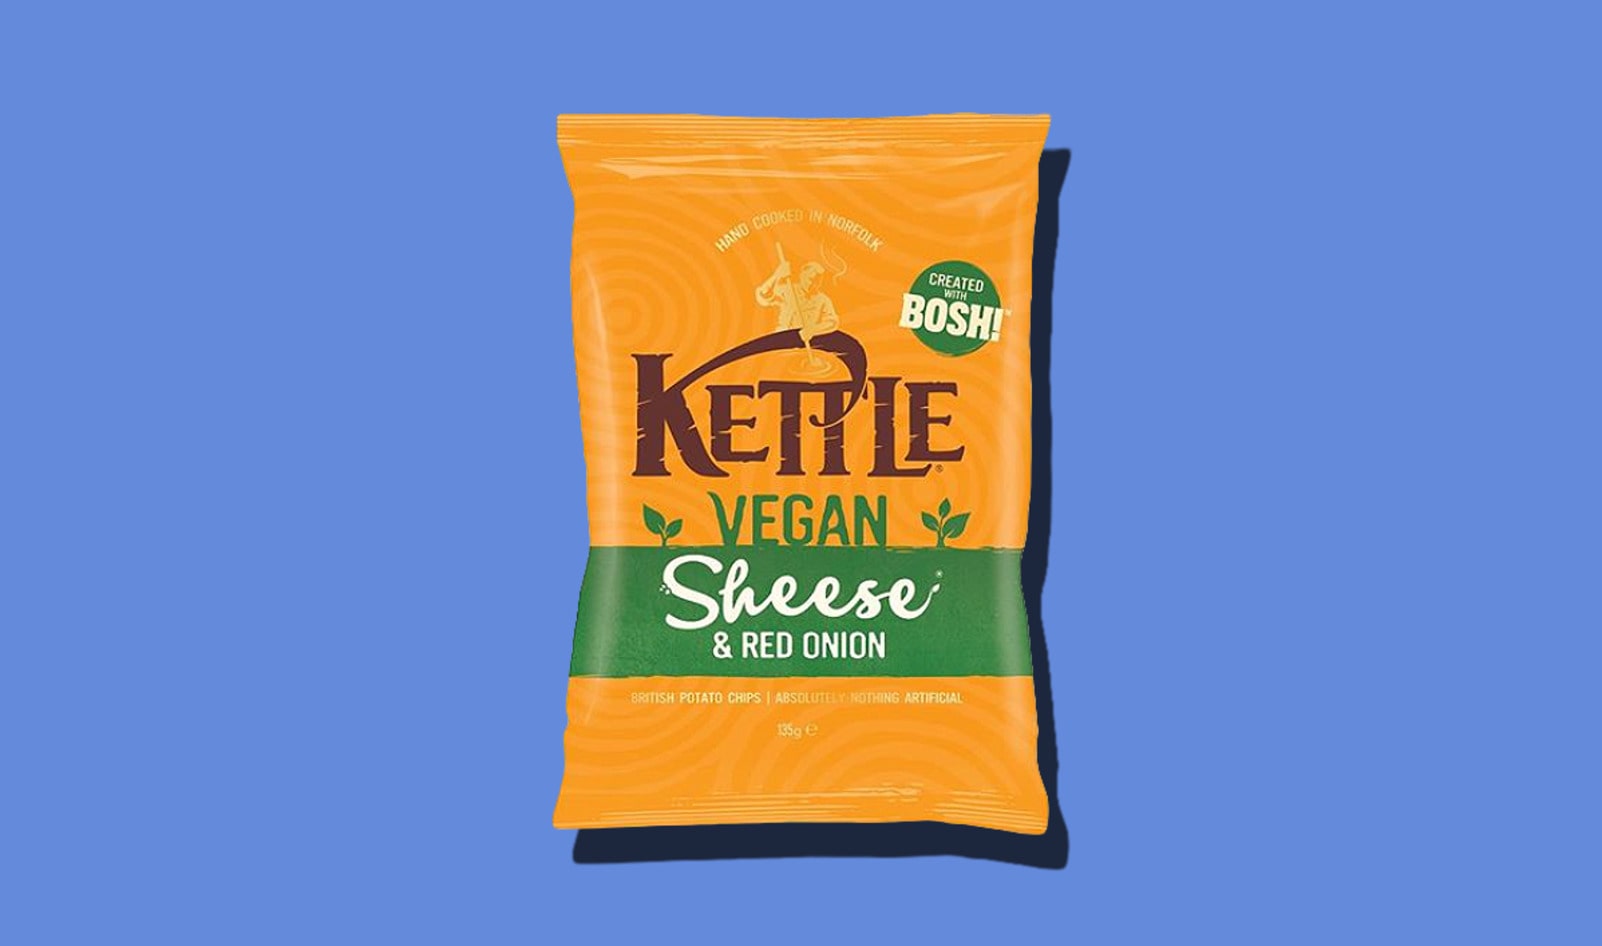 Cheesy Vegan Kettle Chips to Launch in UK